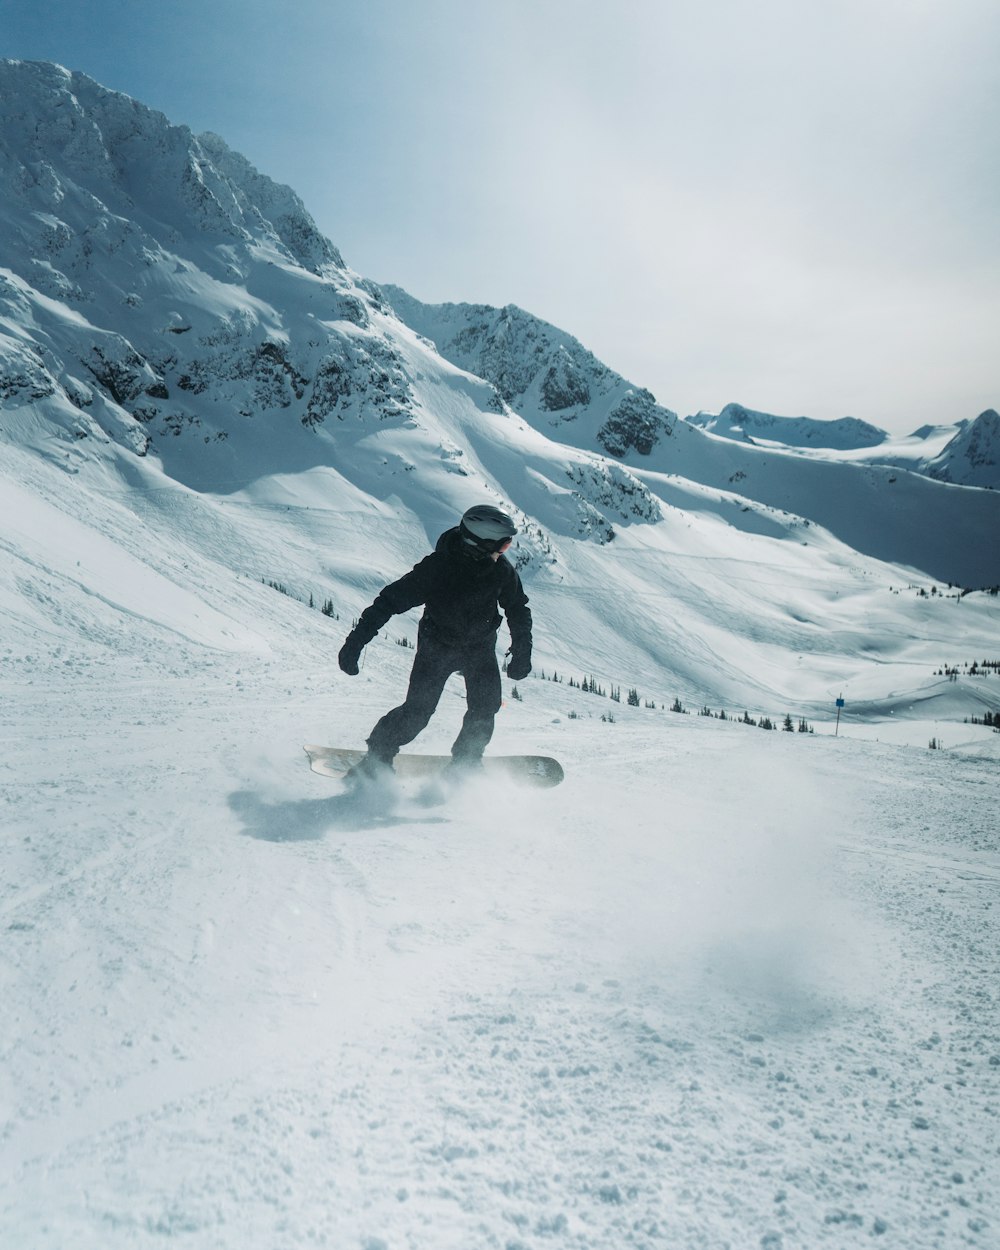 A man riding a snowboard down a snow covered slope photo – Free Canada  Image on Unsplash